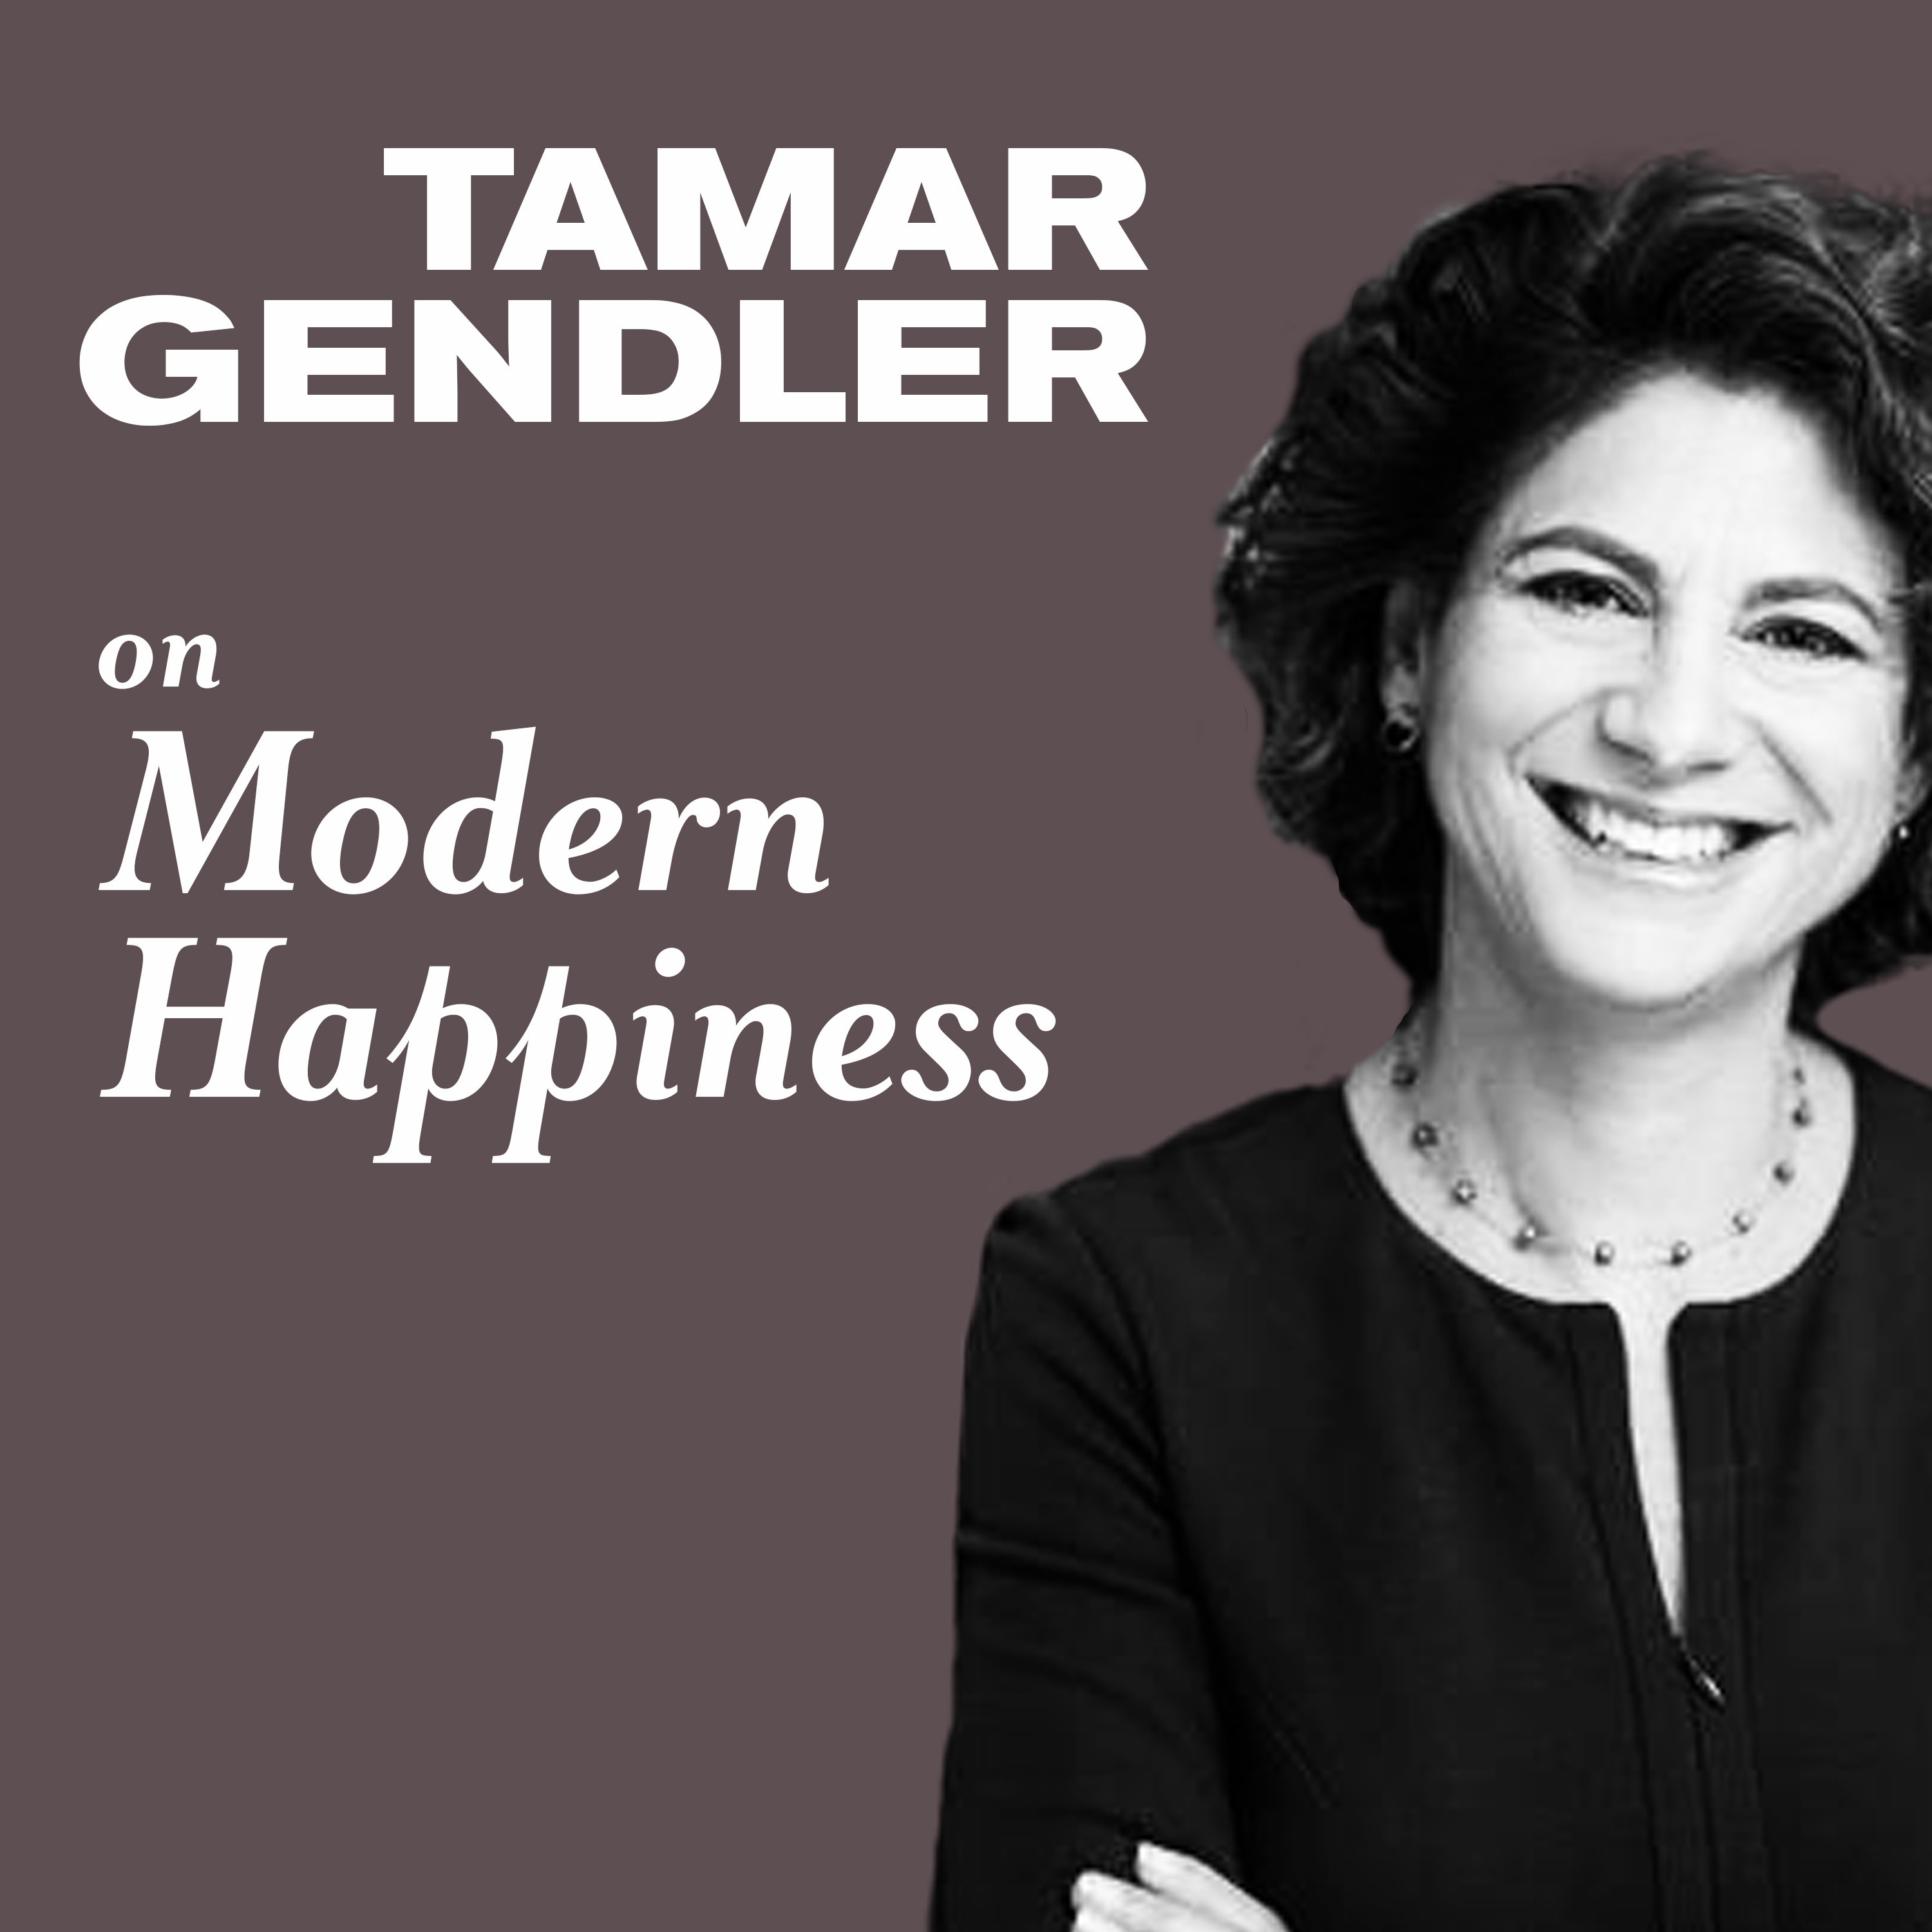 Tamar Gendler On the Five Ancient Secrets to Modern Happiness